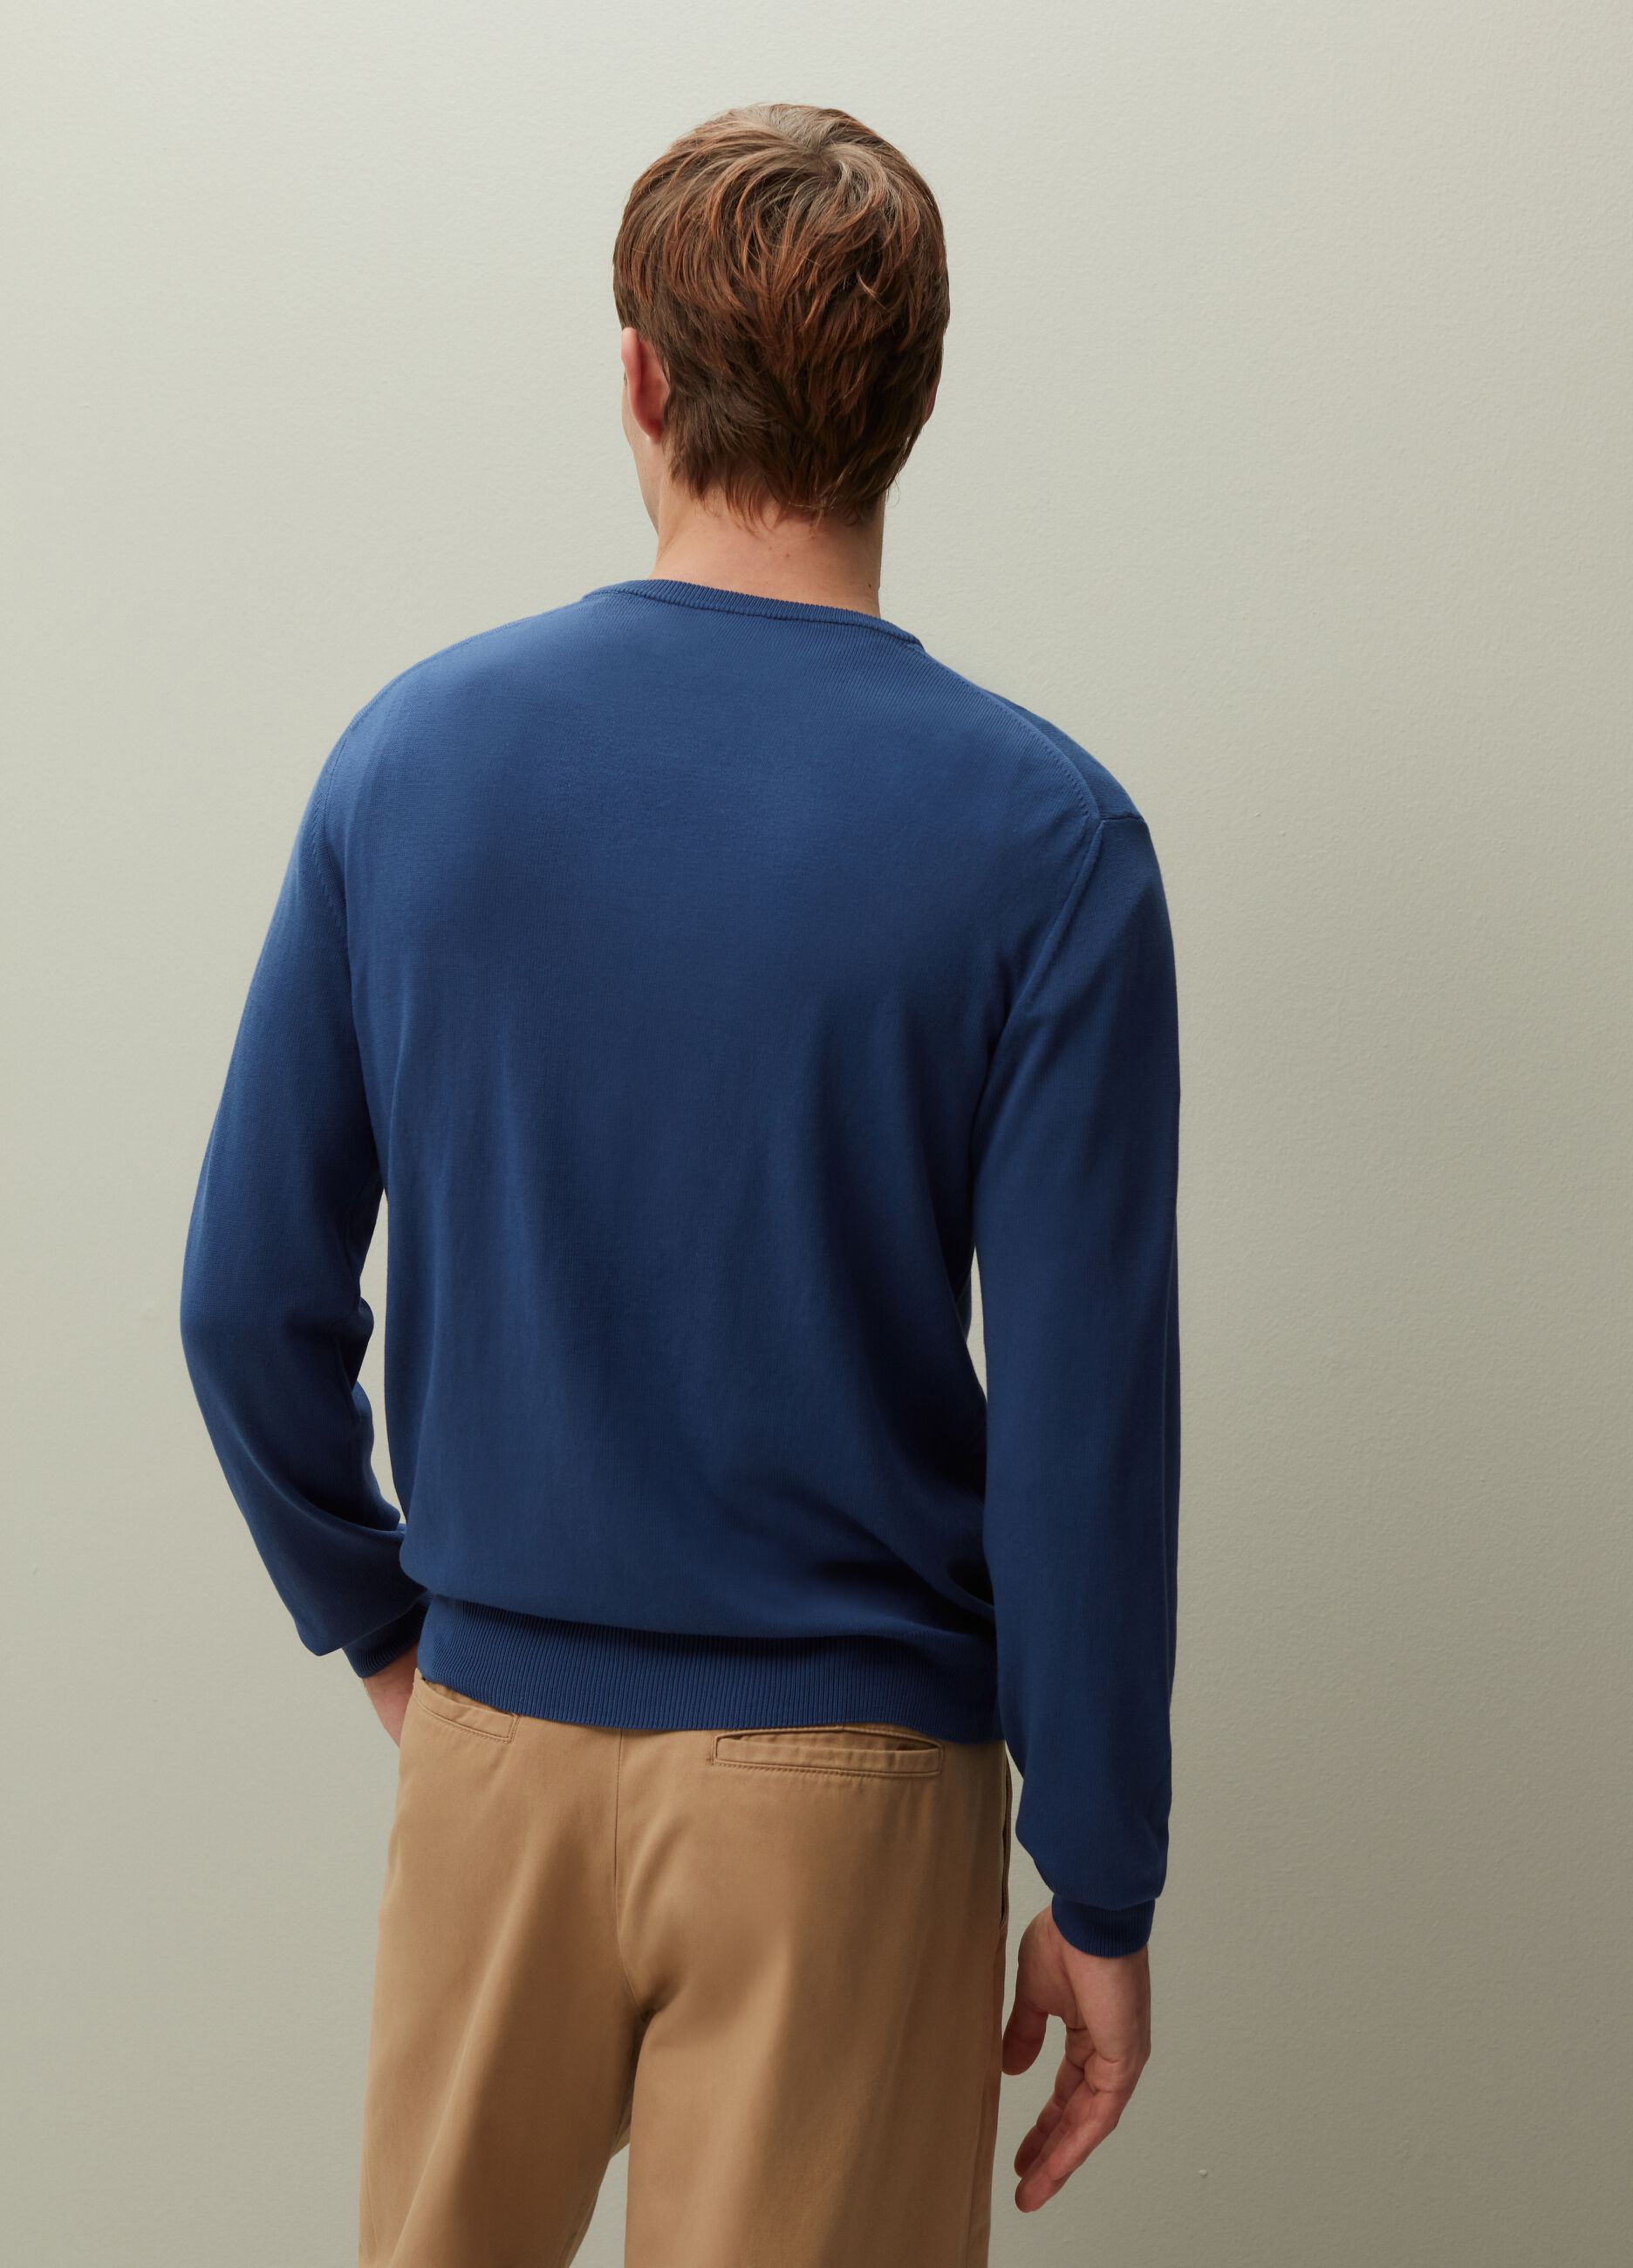 Solid colour pullover with round neck